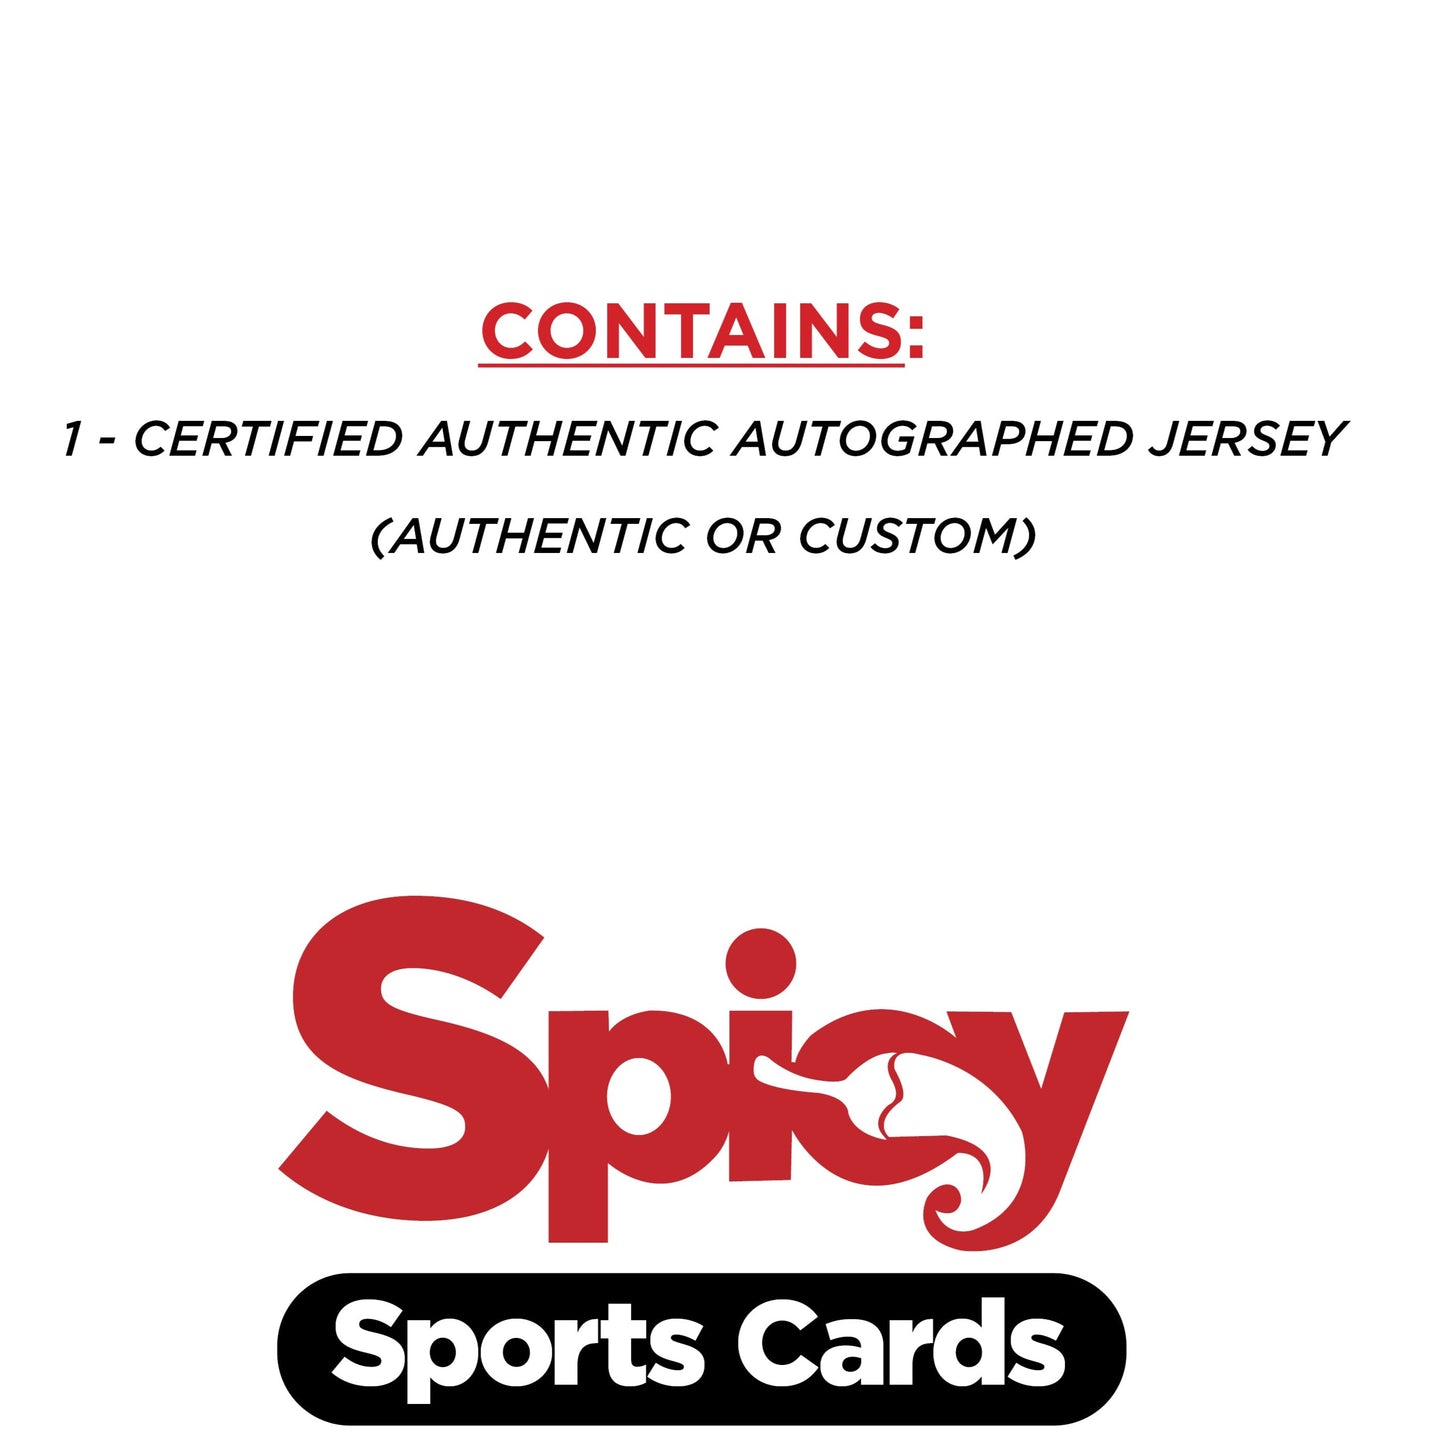 SPICY SPORTS CARDS - 1 GET SPICY!  NFL Signed Jersey